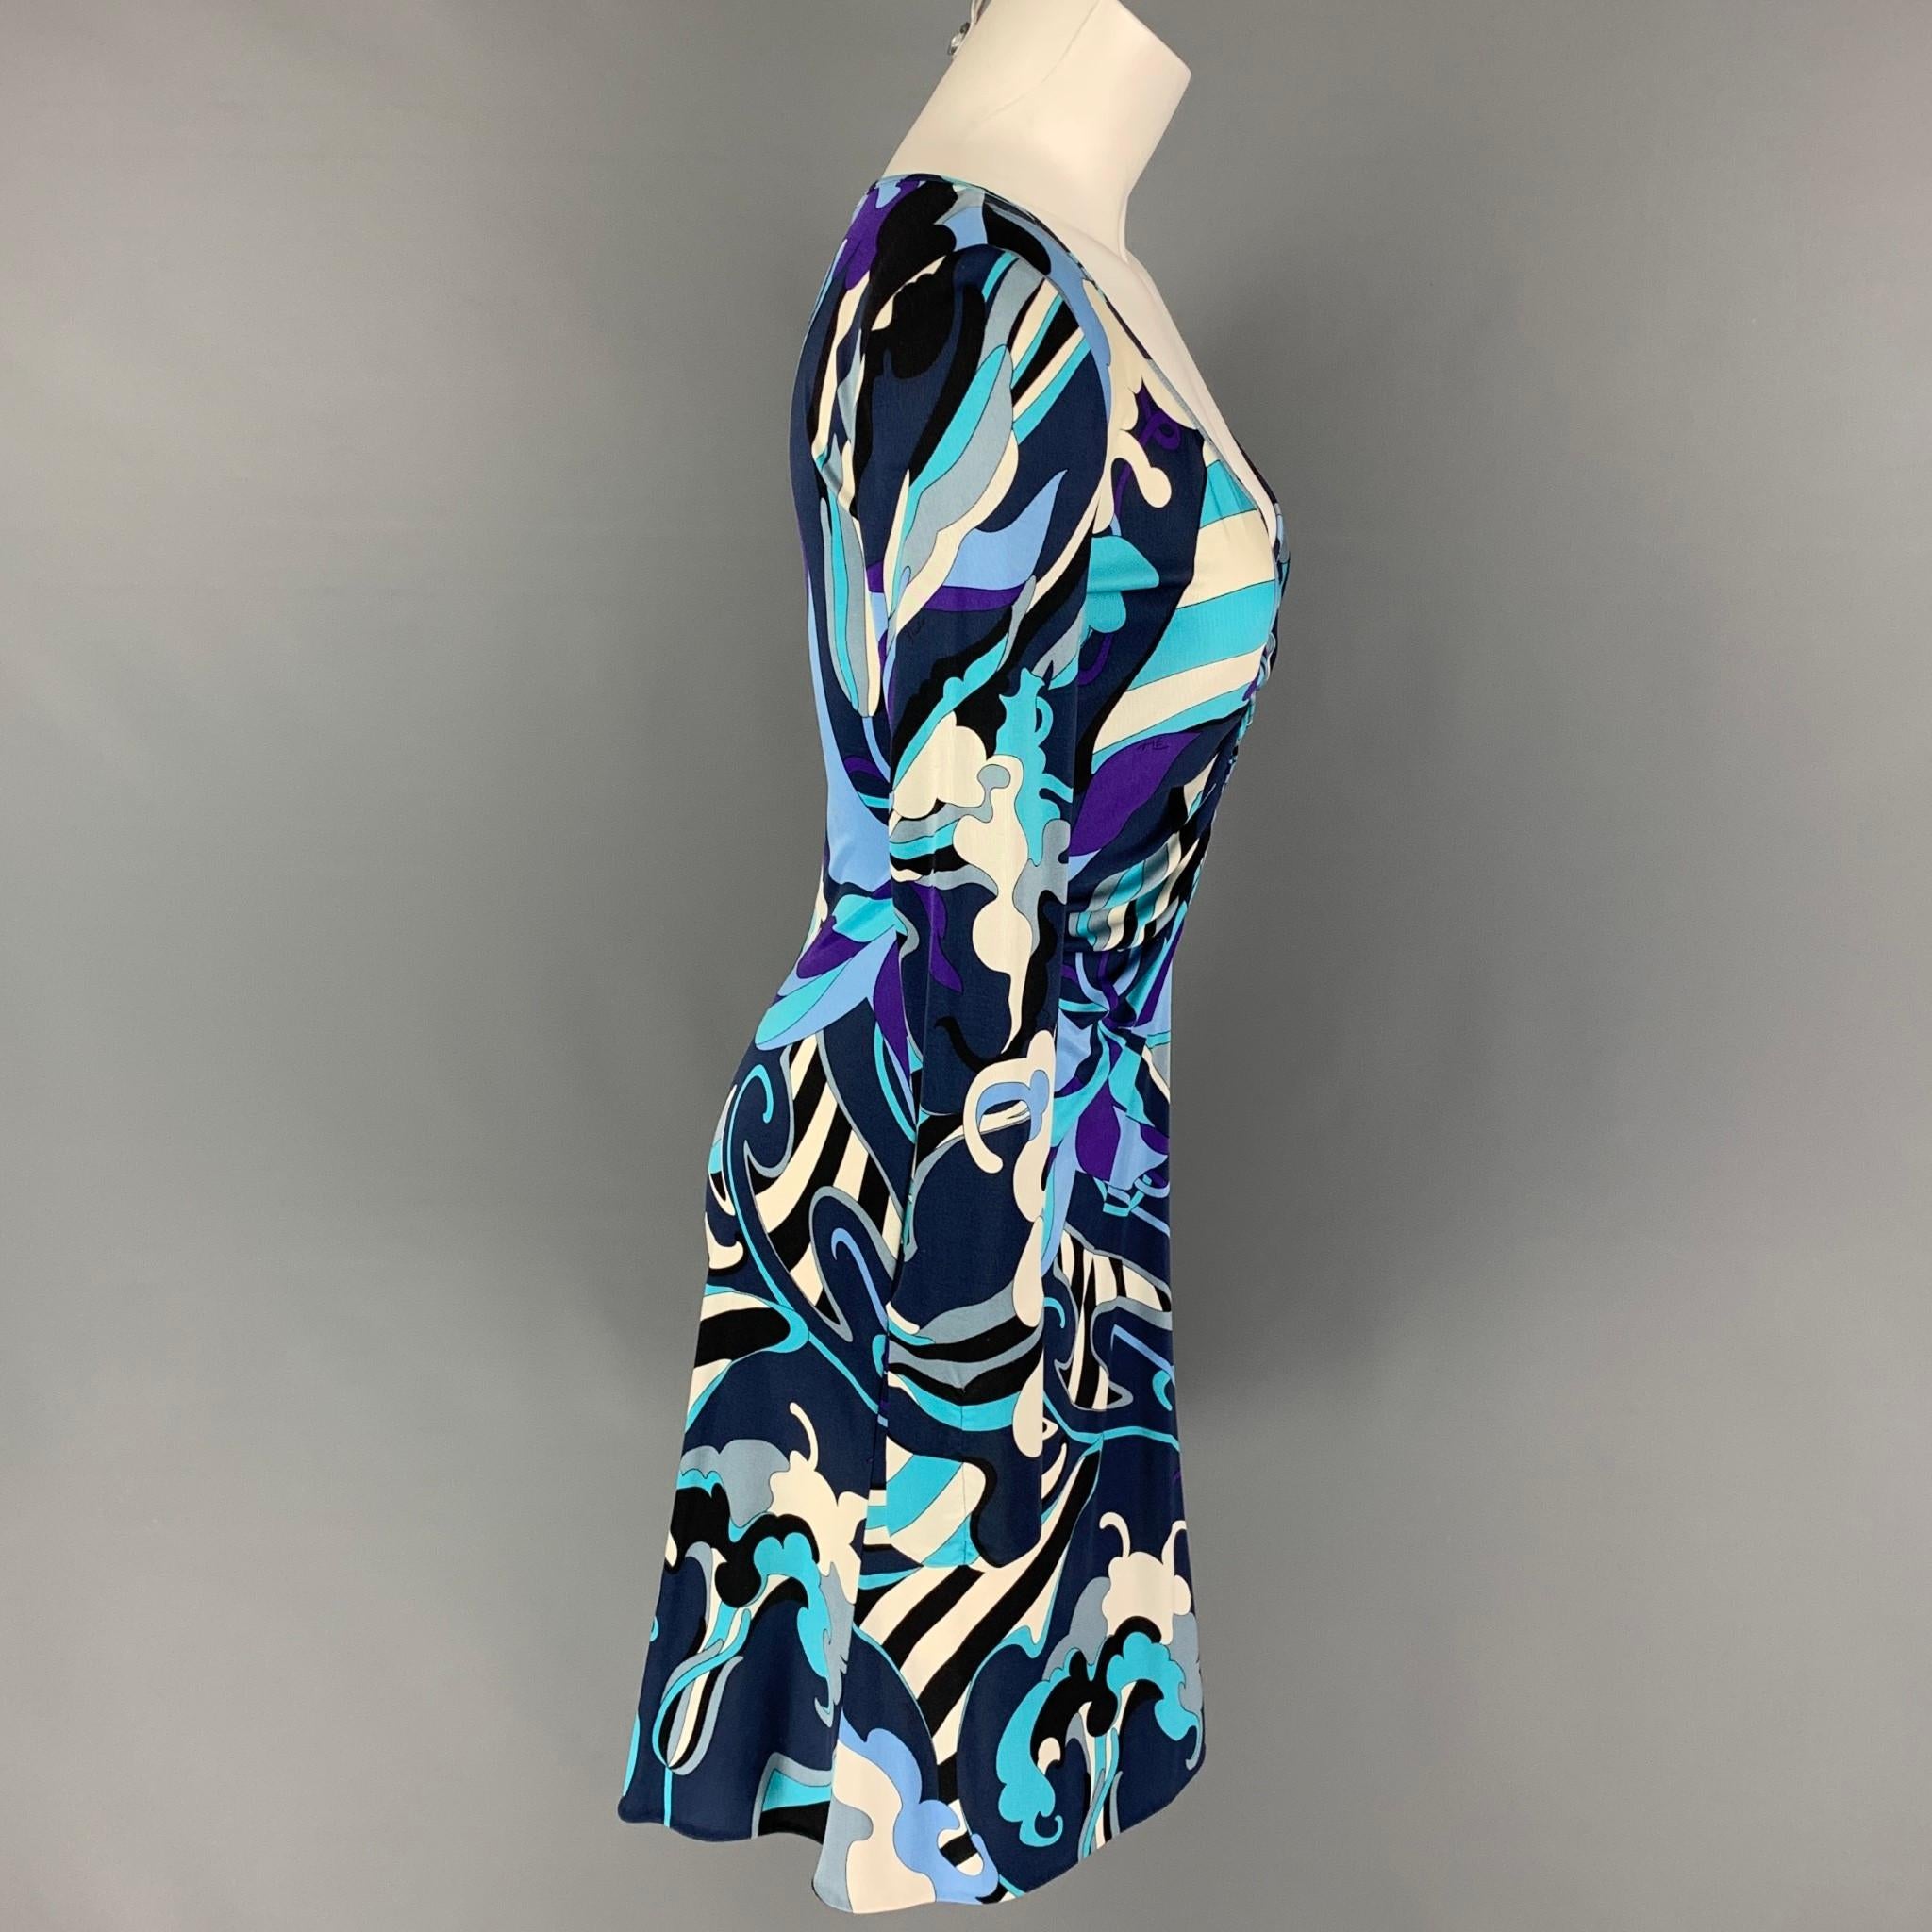 EMILIO PUCCI dress comes in a navy & purple abstract silk featuring a ruched front, long sleeves, and a v-neck. Made in Italy. 

Very Good Pre-Owned Condition.
Marked: I 42 / F 38 / USA 8 / UK 10

Measurements:

Shoulder: 16.5 in.
Bust: 32